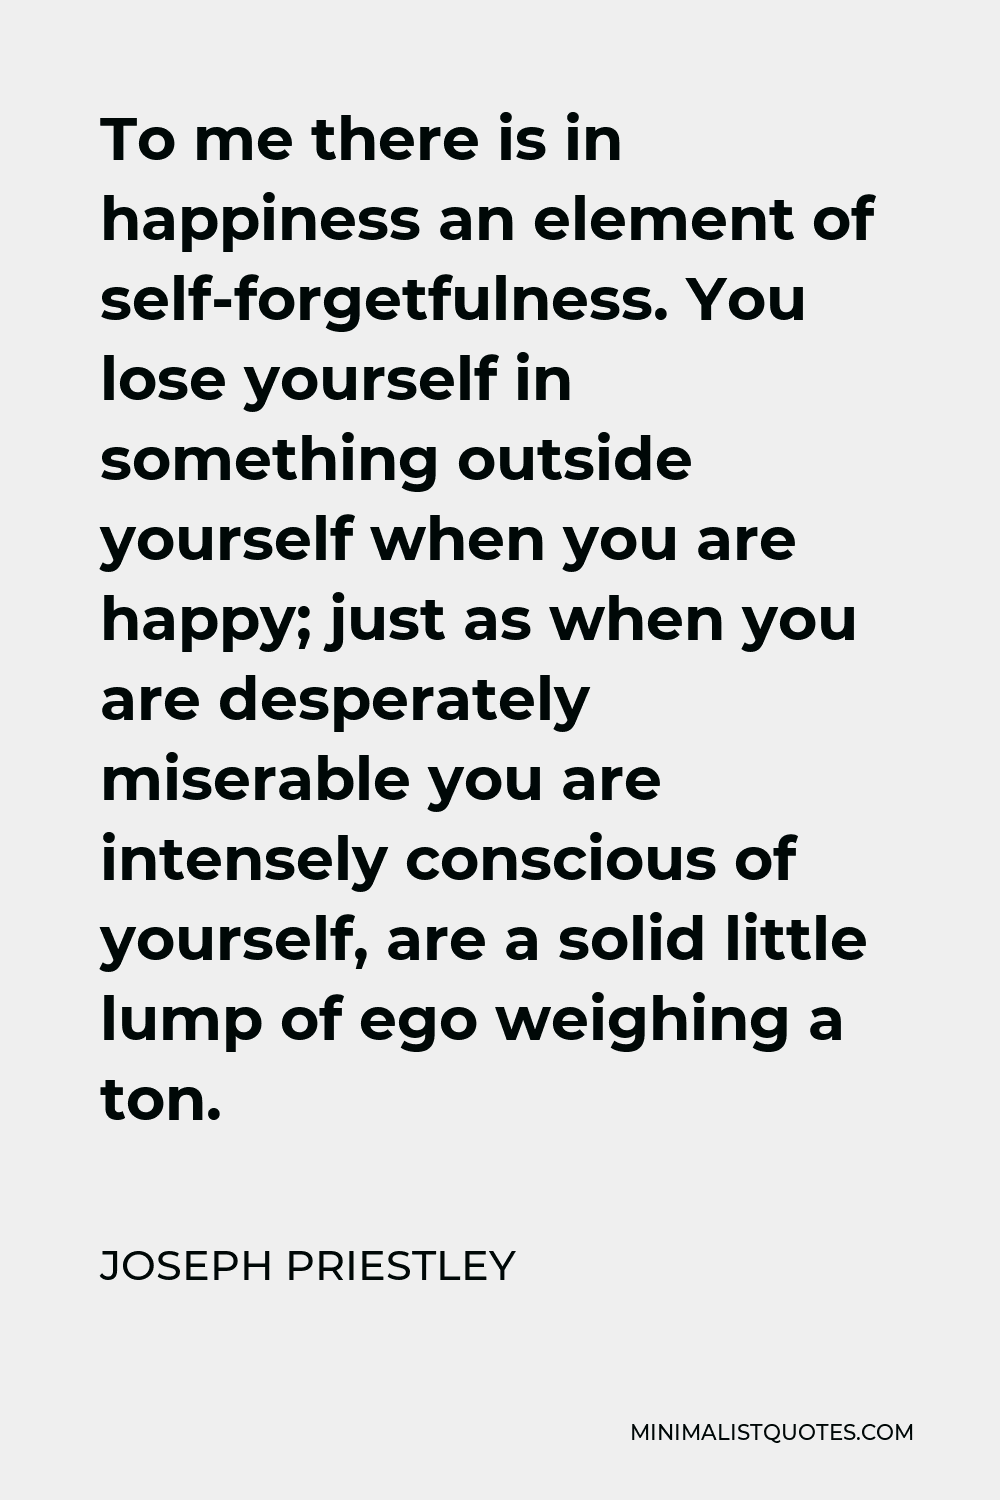 Joseph Priestley Quote - To me there is in happiness an element of self-forgetfulness. You lose yourself in something outside yourself when you are happy; just as when you are desperately miserable you are intensely conscious of yourself, are a solid little lump of ego weighing a ton.